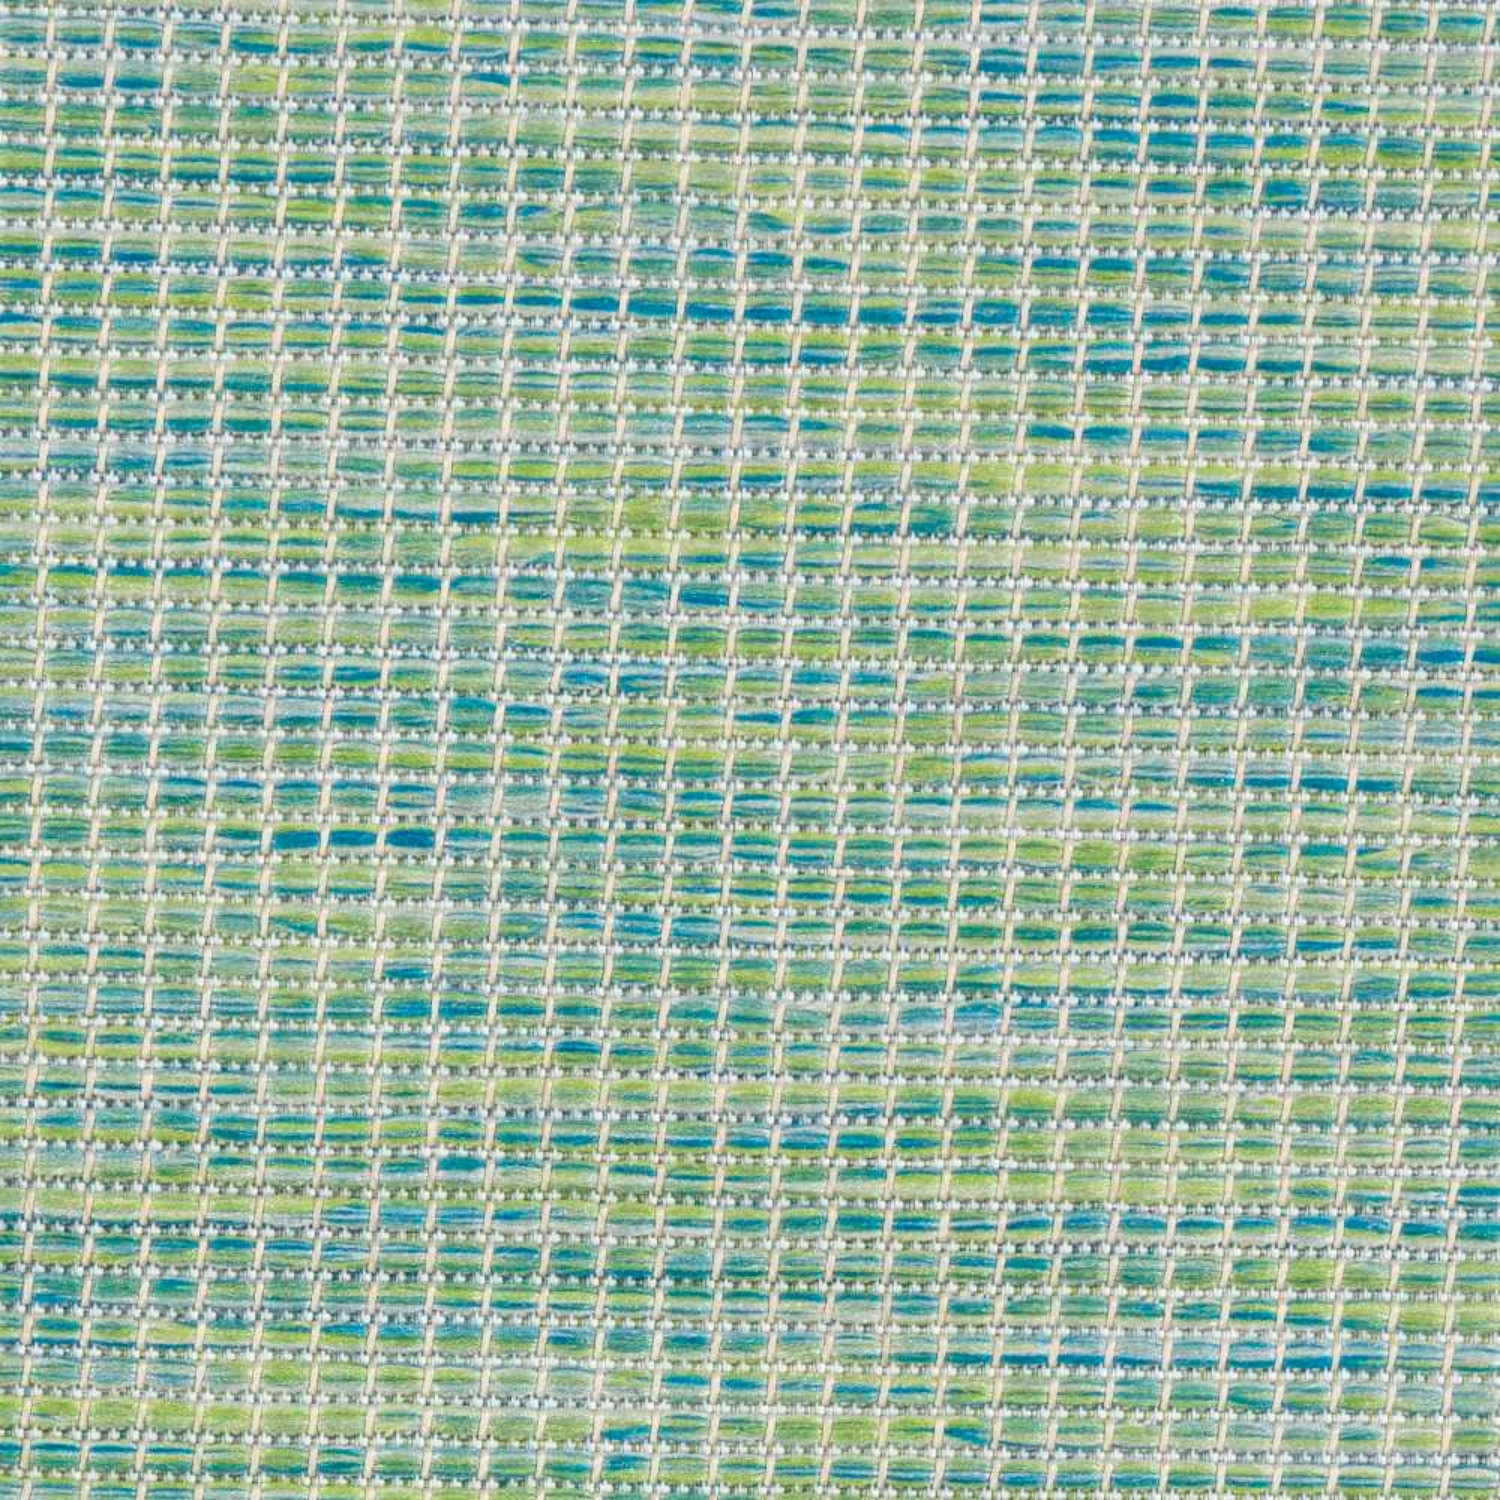 Positano Rug Blue Green 6 x 9 Close Up of Colors and Texture